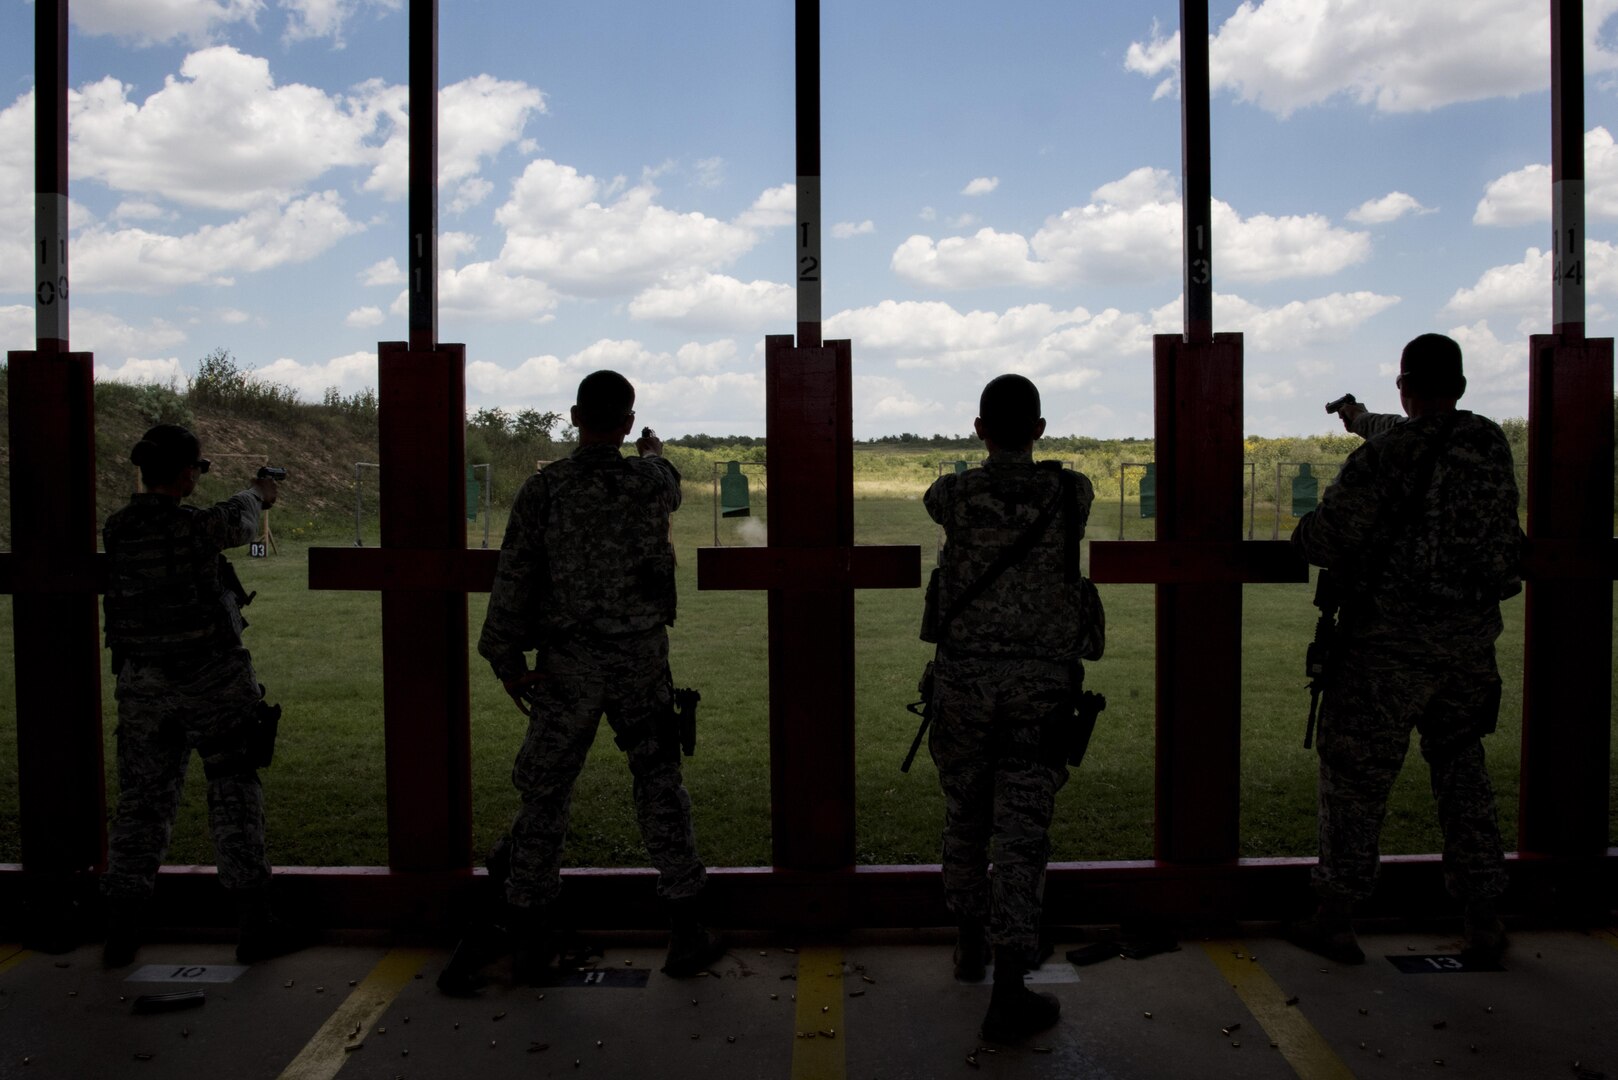 502nd Security and Readiness Group security forces Airmen take part in weapons training during Controlled FORCE Inc.’s force operator course June 7, 2017, at Joint Base San Antonio-Lackland Medina Training Annex, Texas. The force operator course is designed to increase safety by helping students become more adept at close-range subject control. 